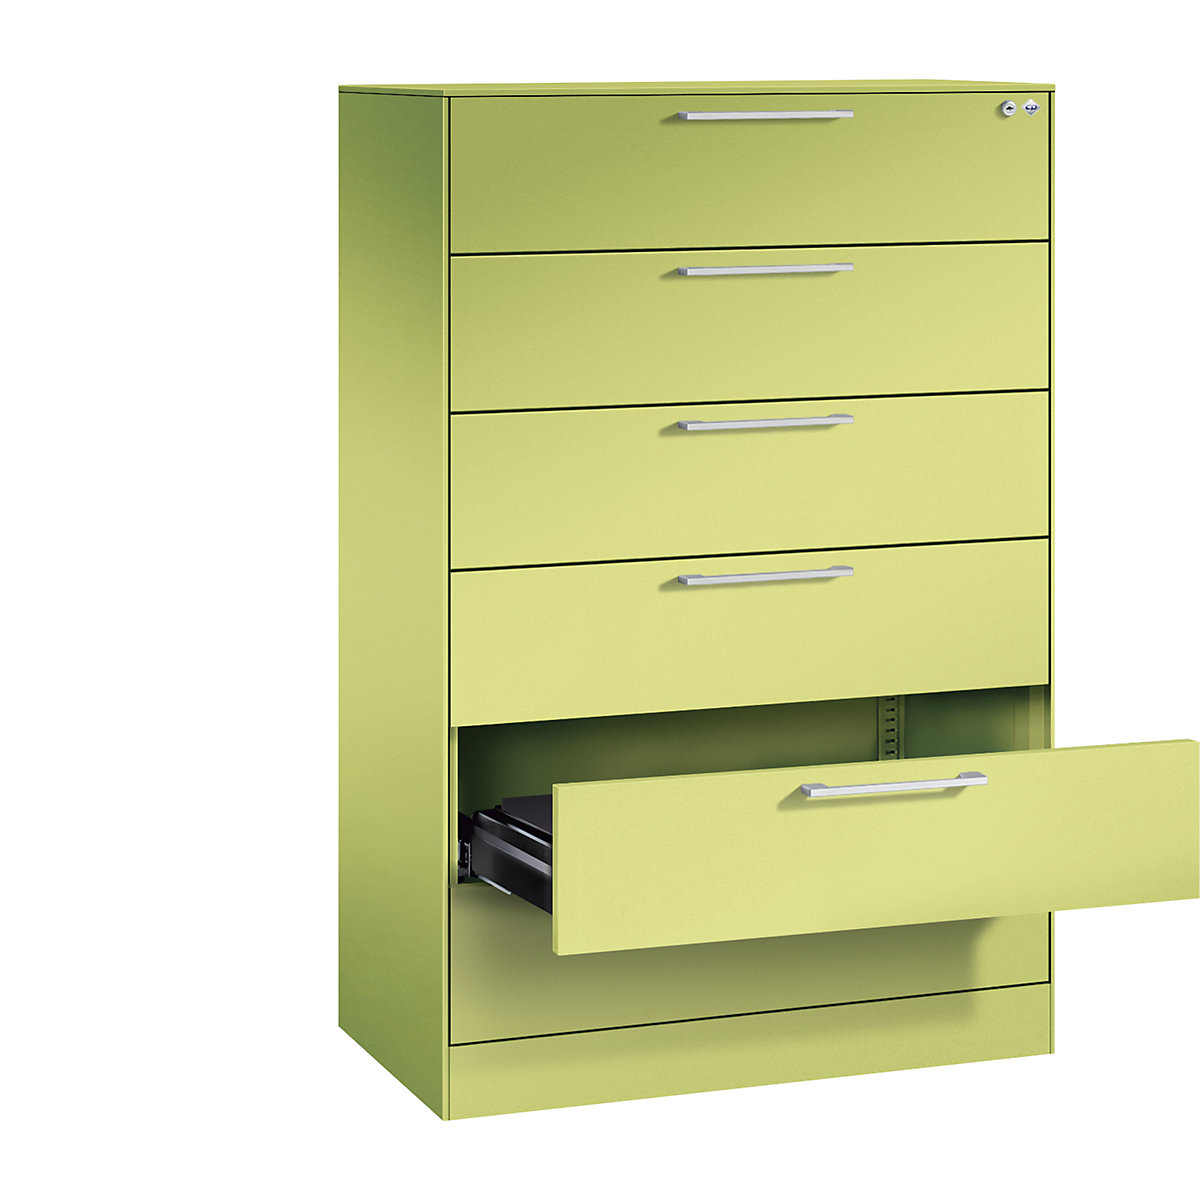 ASISTO card file cabinet – C+P, height 1292 mm, with 6 drawers, A5 landscape, viridian green/viridian green-11